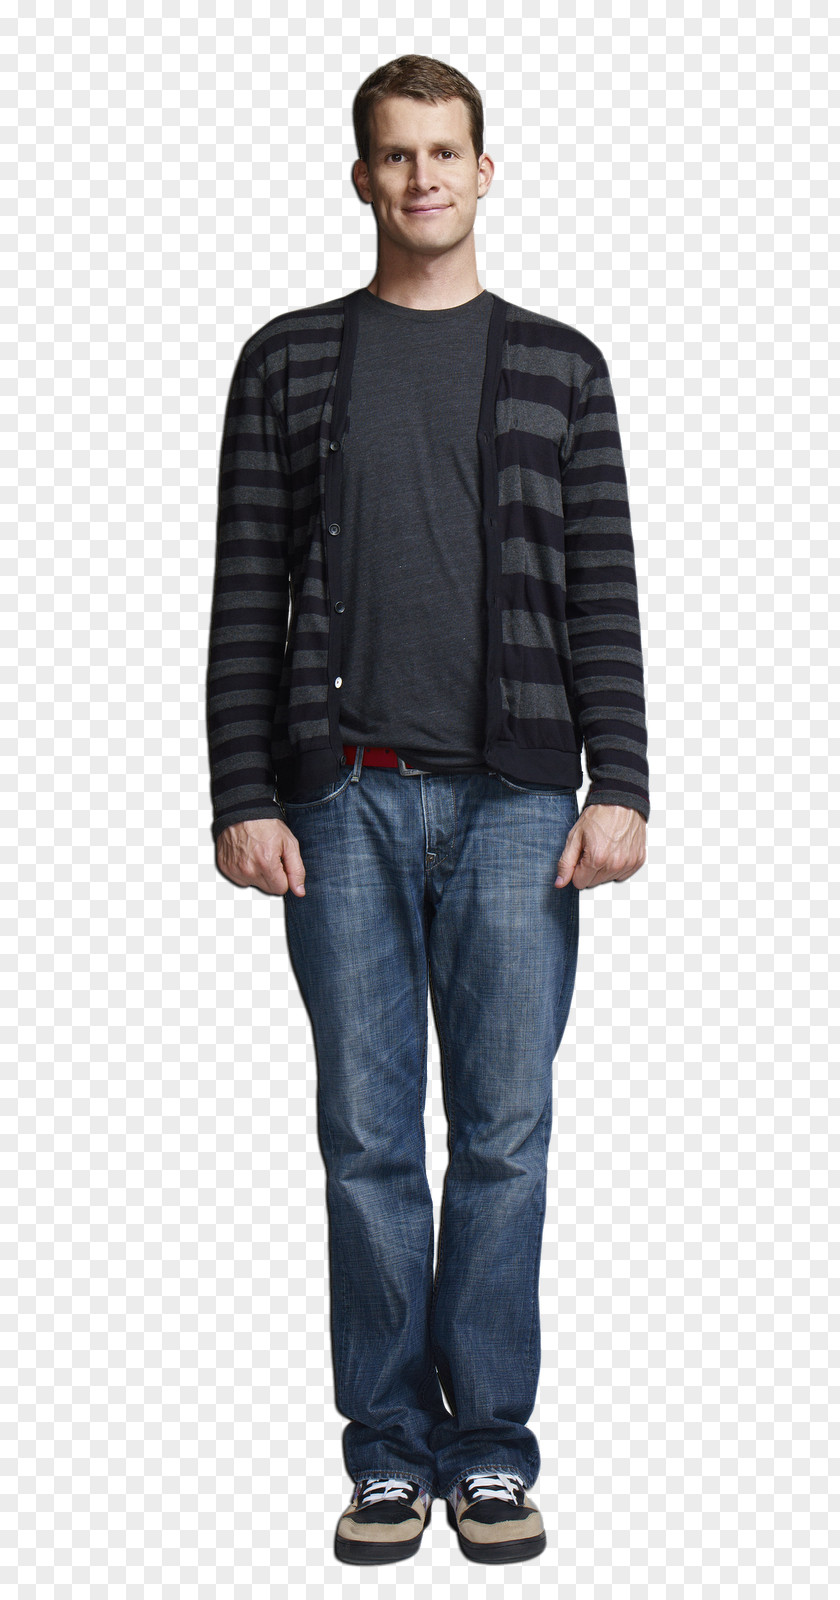 Stand Up Comedy Daniel Tosh Blazer T-shirt Jacket Clothing PNG